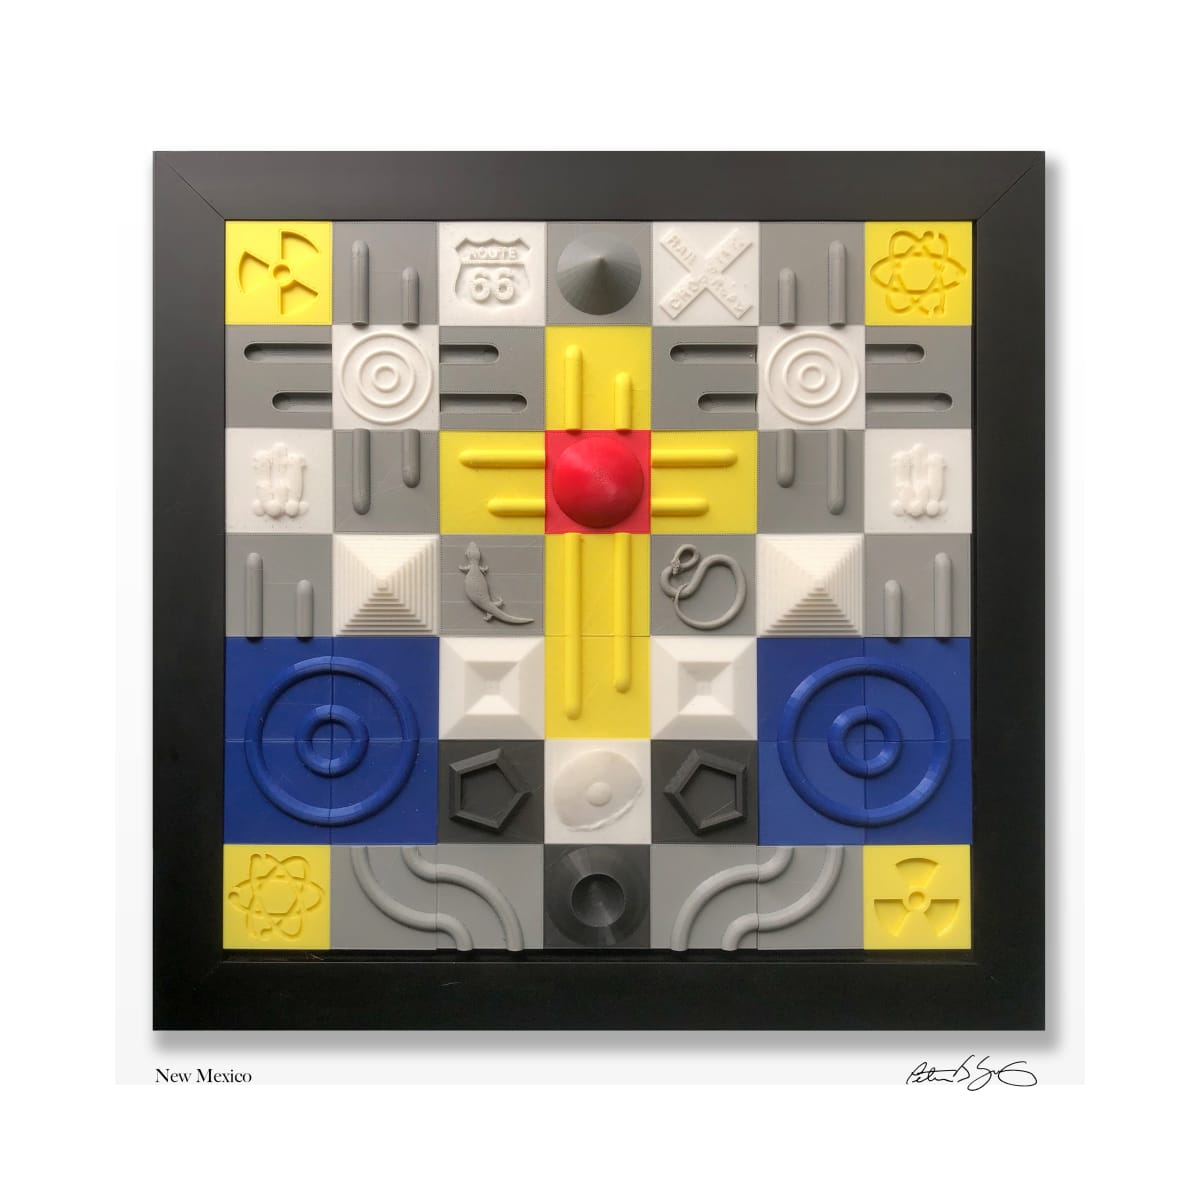 New Mexico by Peter J Sucy Digital Arts  Image: Created from 3D printed 2.5" x 2.5" tiles this mosaic captures the spirit of New Mexico.
